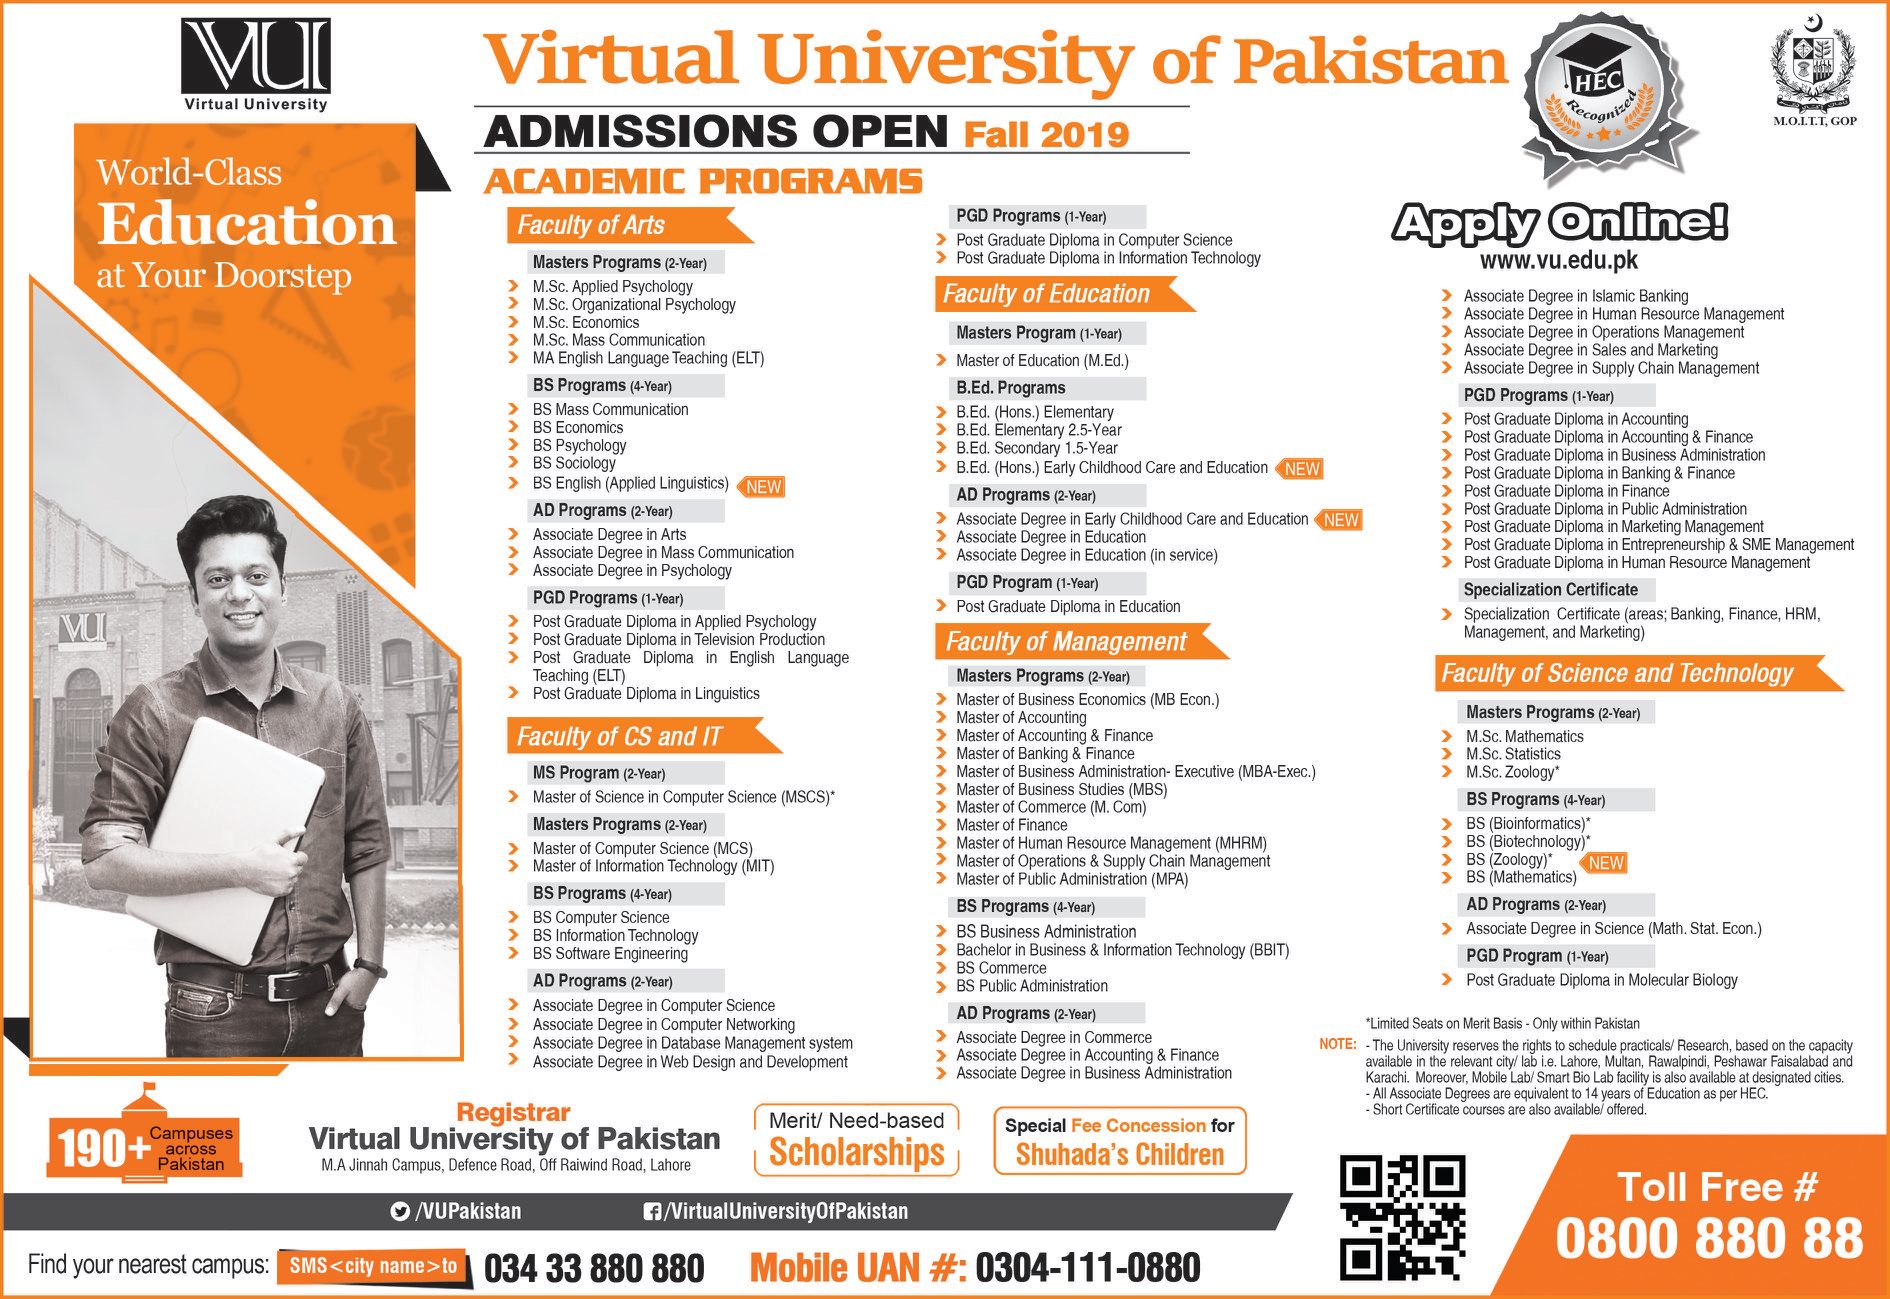 Virtual University of Pakistan APPLY FOR ADMISSIONS (FALL 2019)